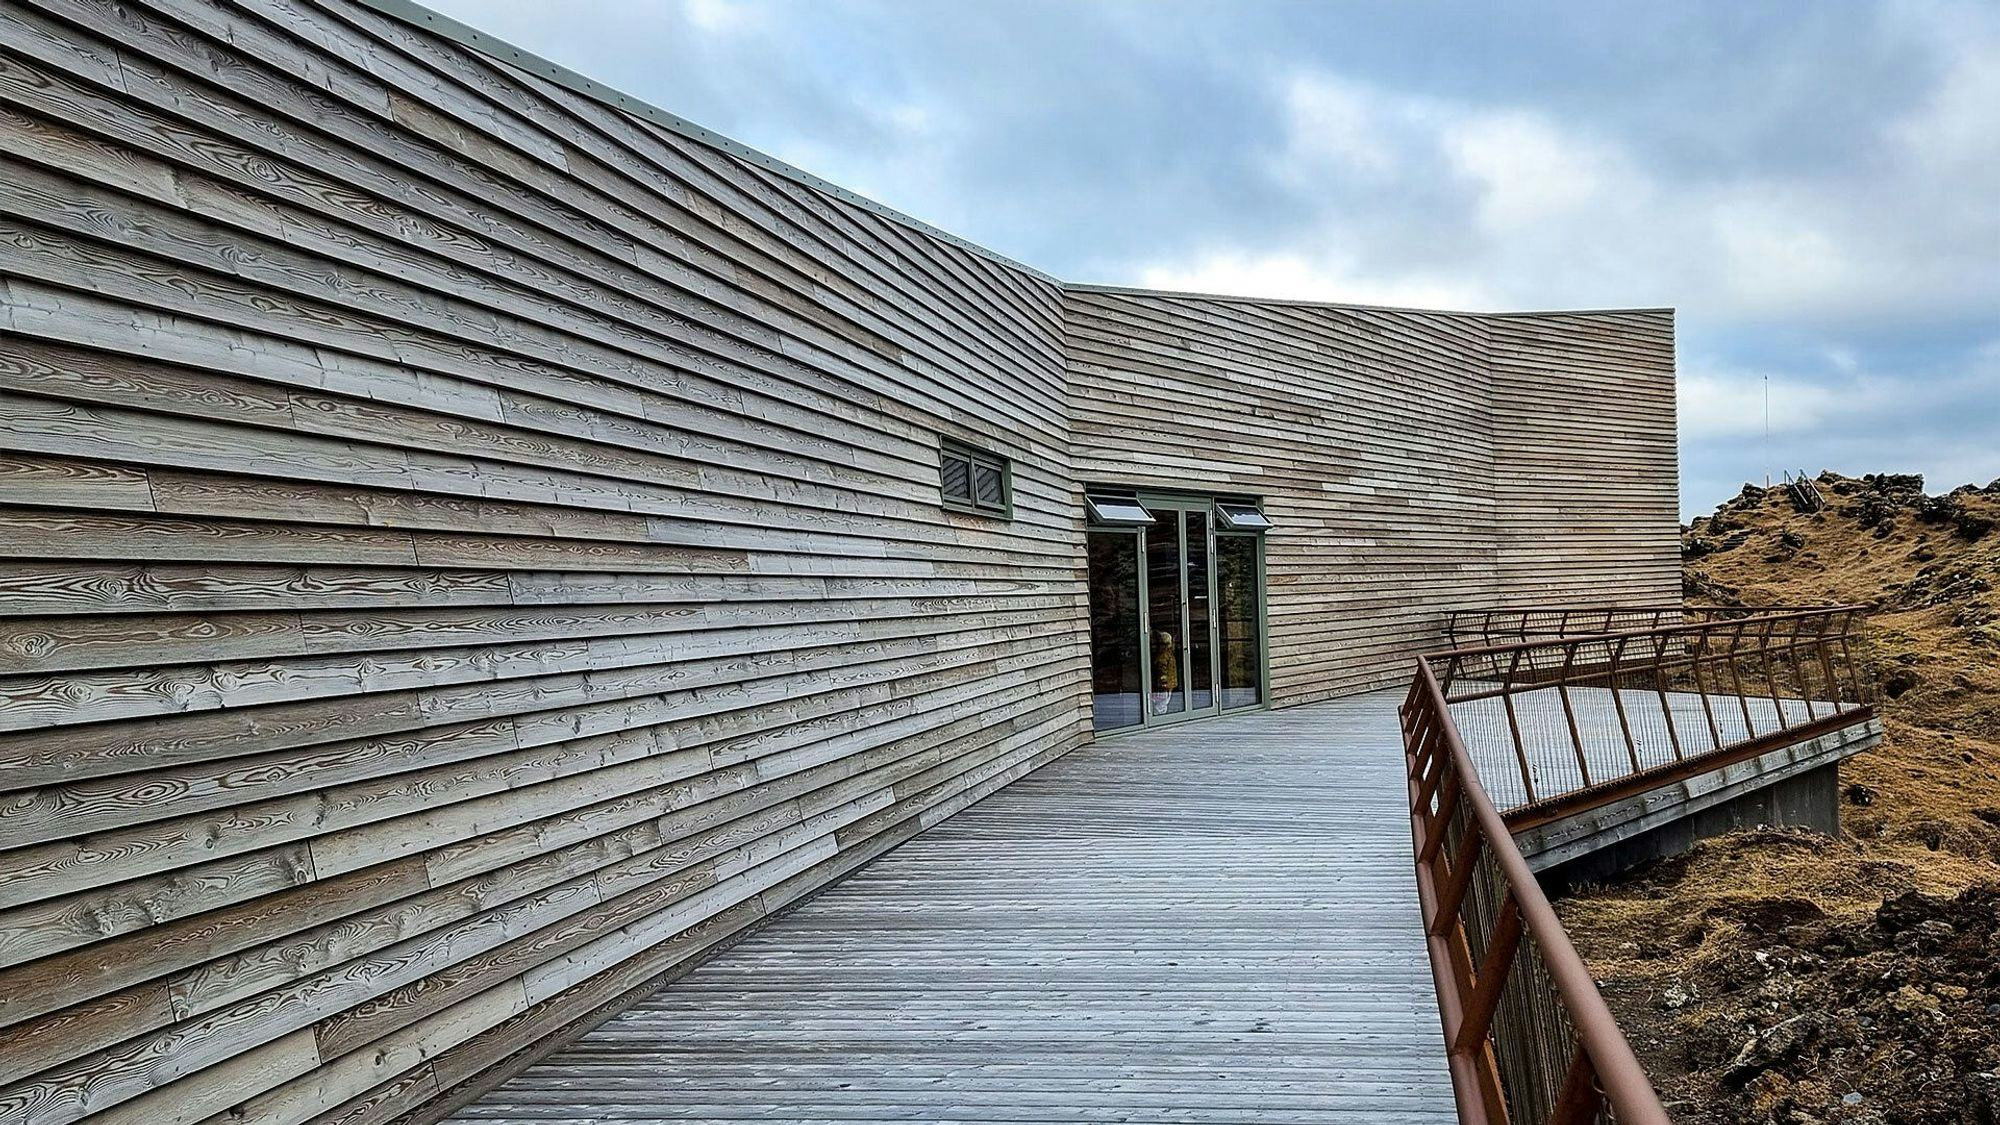 A wooden walkaway leading to a modern building with horizontal slat siding in a natural setting